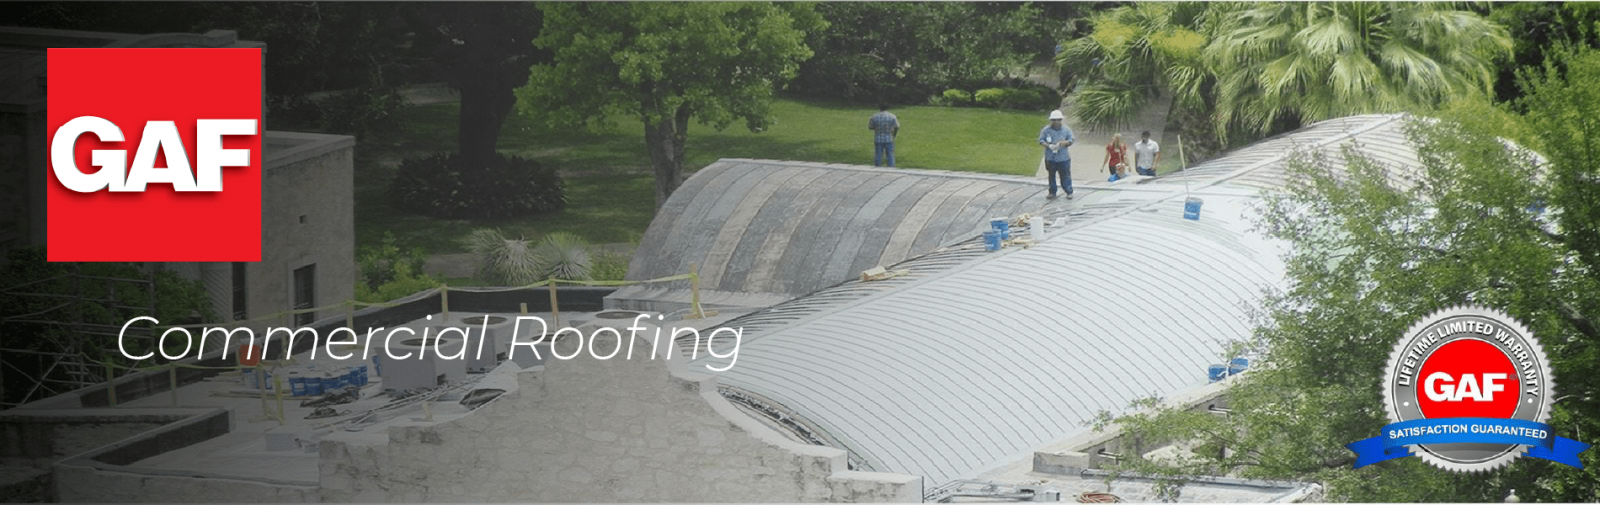 Mountain Pacific Roofing Images